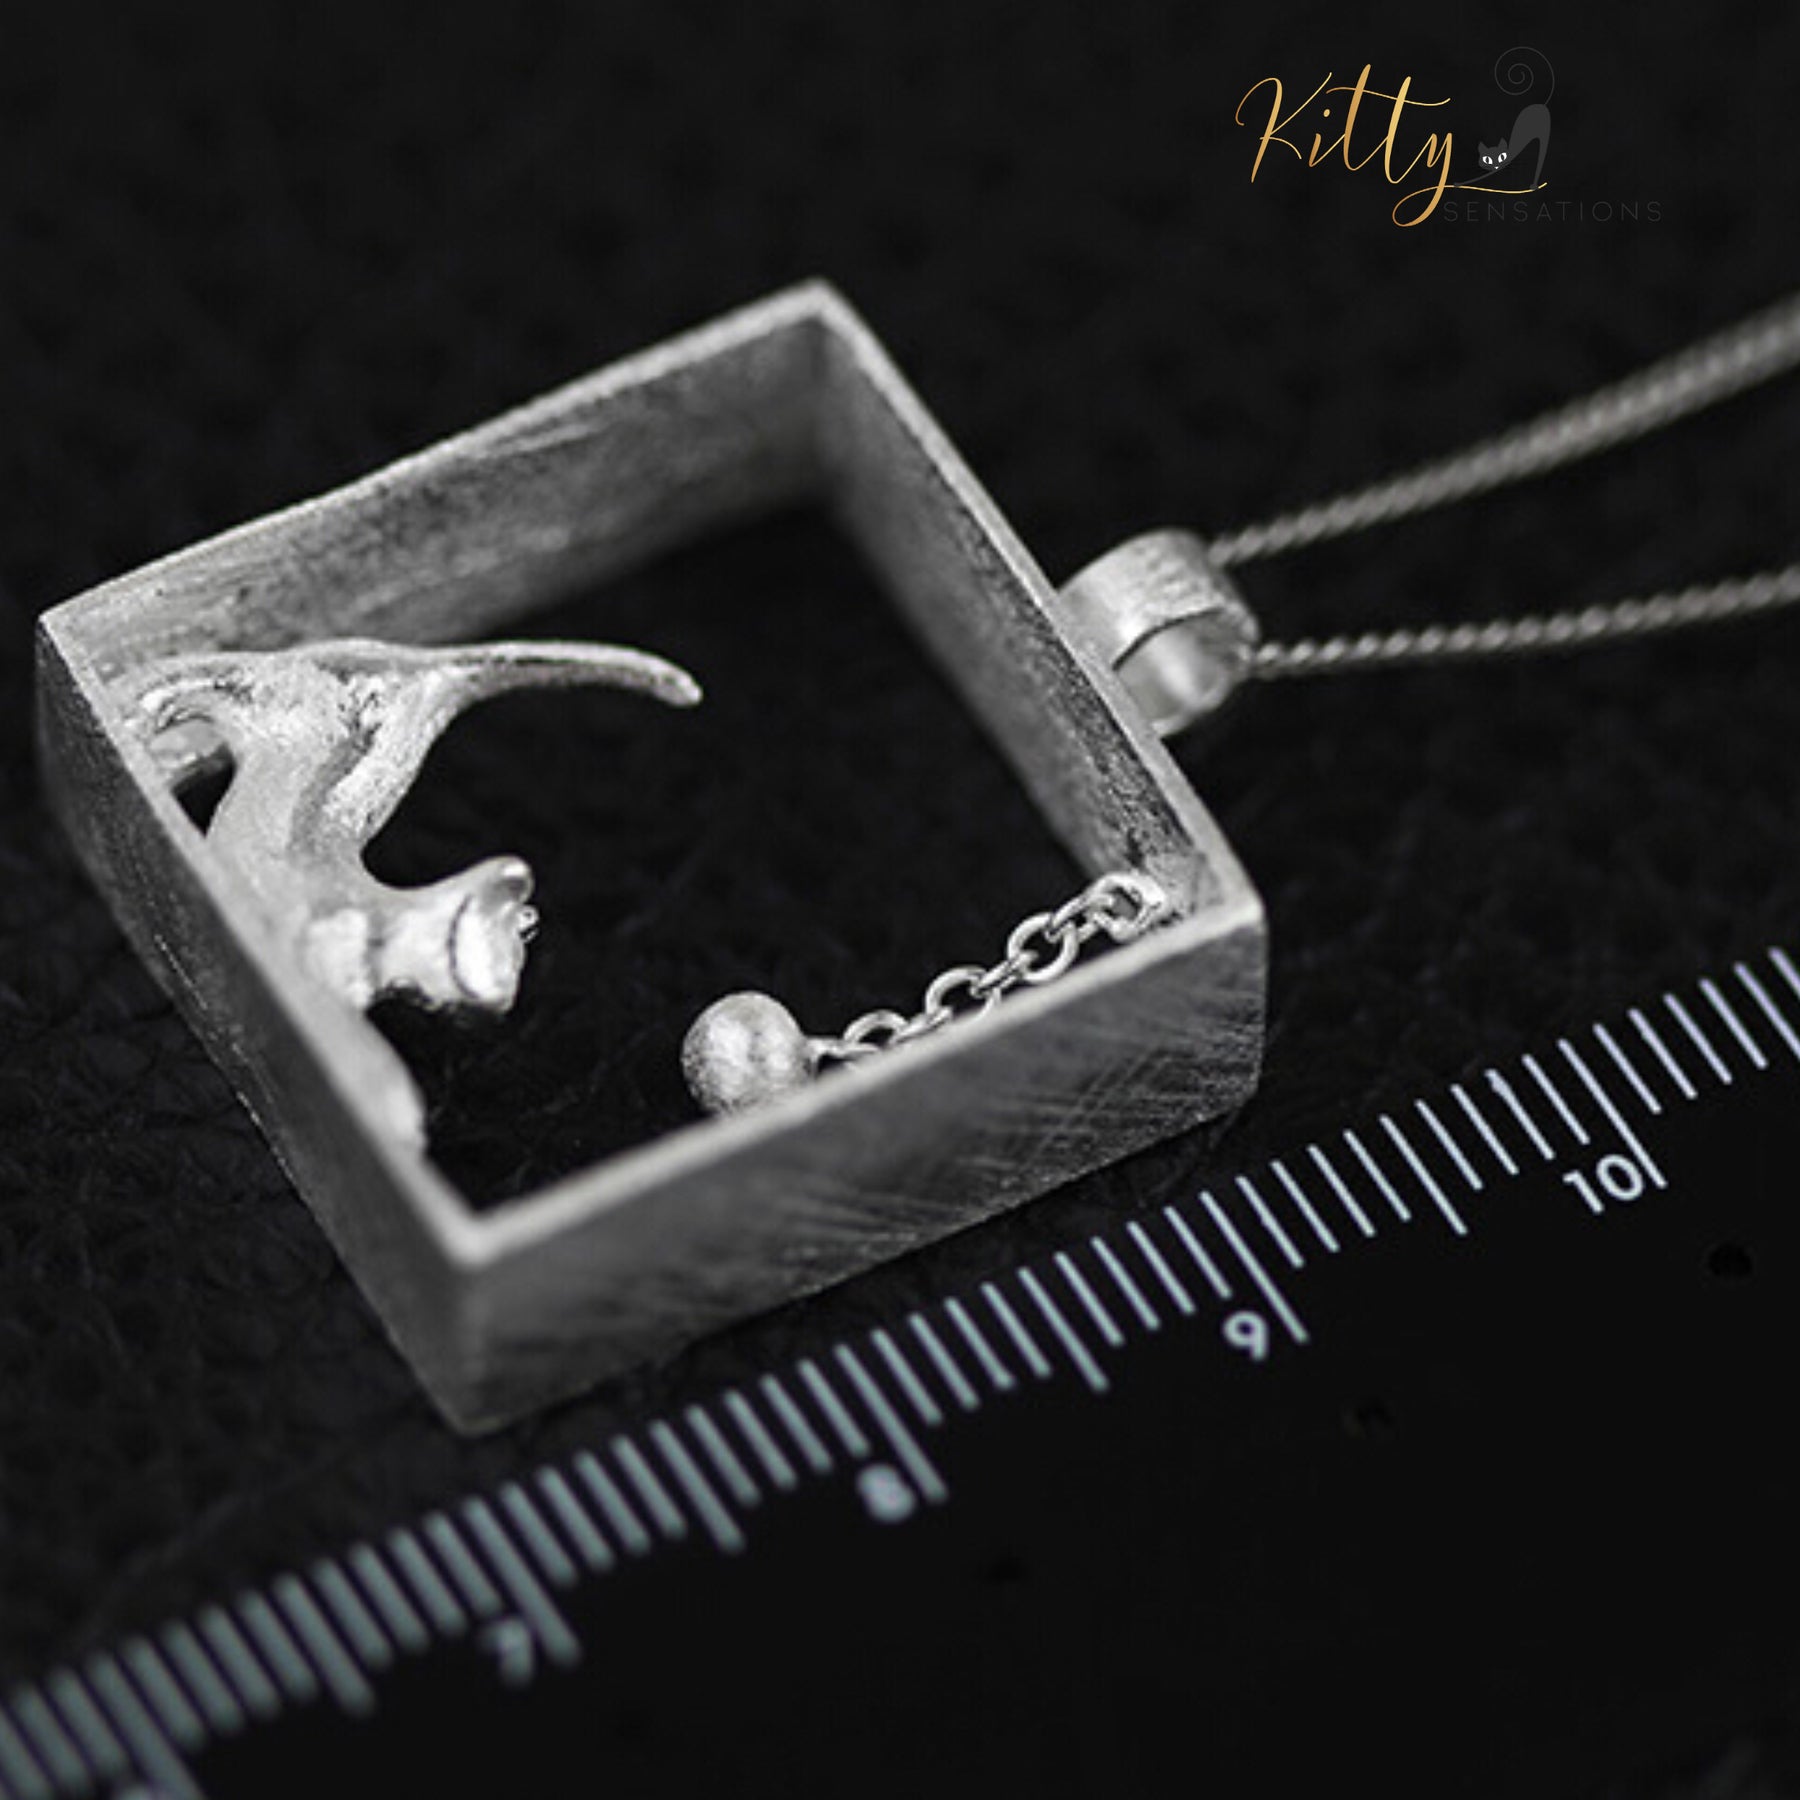 KittySensations @KittySensations · 5h http://KittySensations.com: 3D Playful-Kitty-in-Square-Frame Necklace in Solid 925 Sterling Silver ($42.55): https://kittysensations.com/products/playful-kitty-in-square-frame-necklace-in-solid-925-sterling-silver